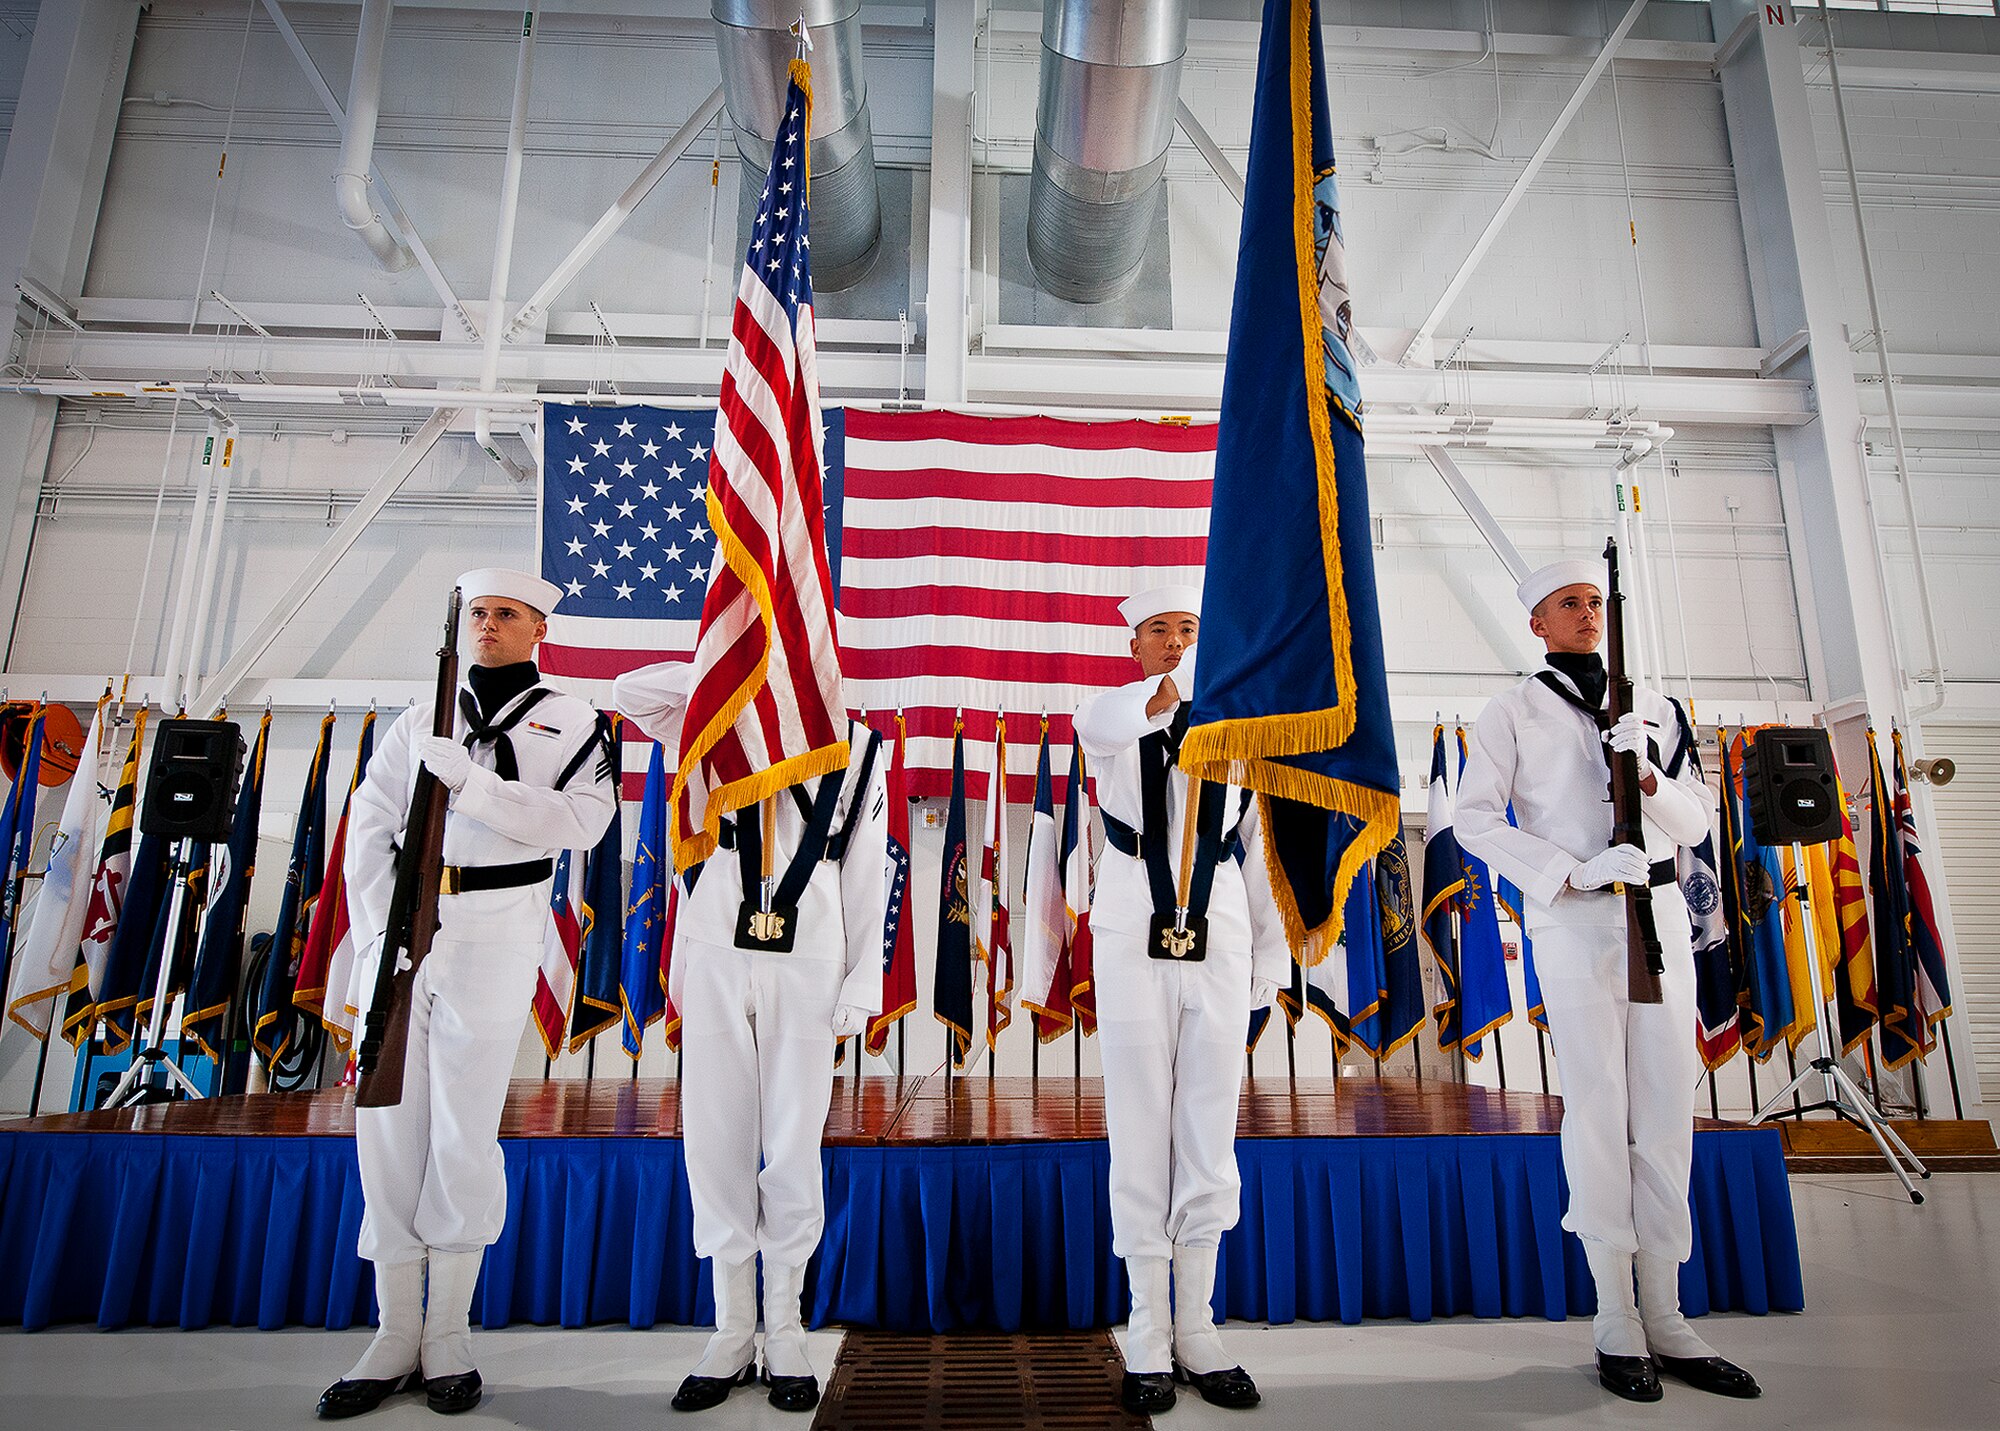 Naval Air Station Pensacola’s color guard presents the colors at the beginning of a chief petty officer pinning ceremony held by the Navy's F-35 Lightning II squadron, VFA-101, Sept. 14 at Eglin Air Force Base, Fla. The ceremony formally marks the transition from E-6 to chief.  There were four Sailors who pinned on the new rank. A Marine and a Soldier were also pinned as honorary chiefs.  (U.S. Air Force photo/Samuel King Jr.)